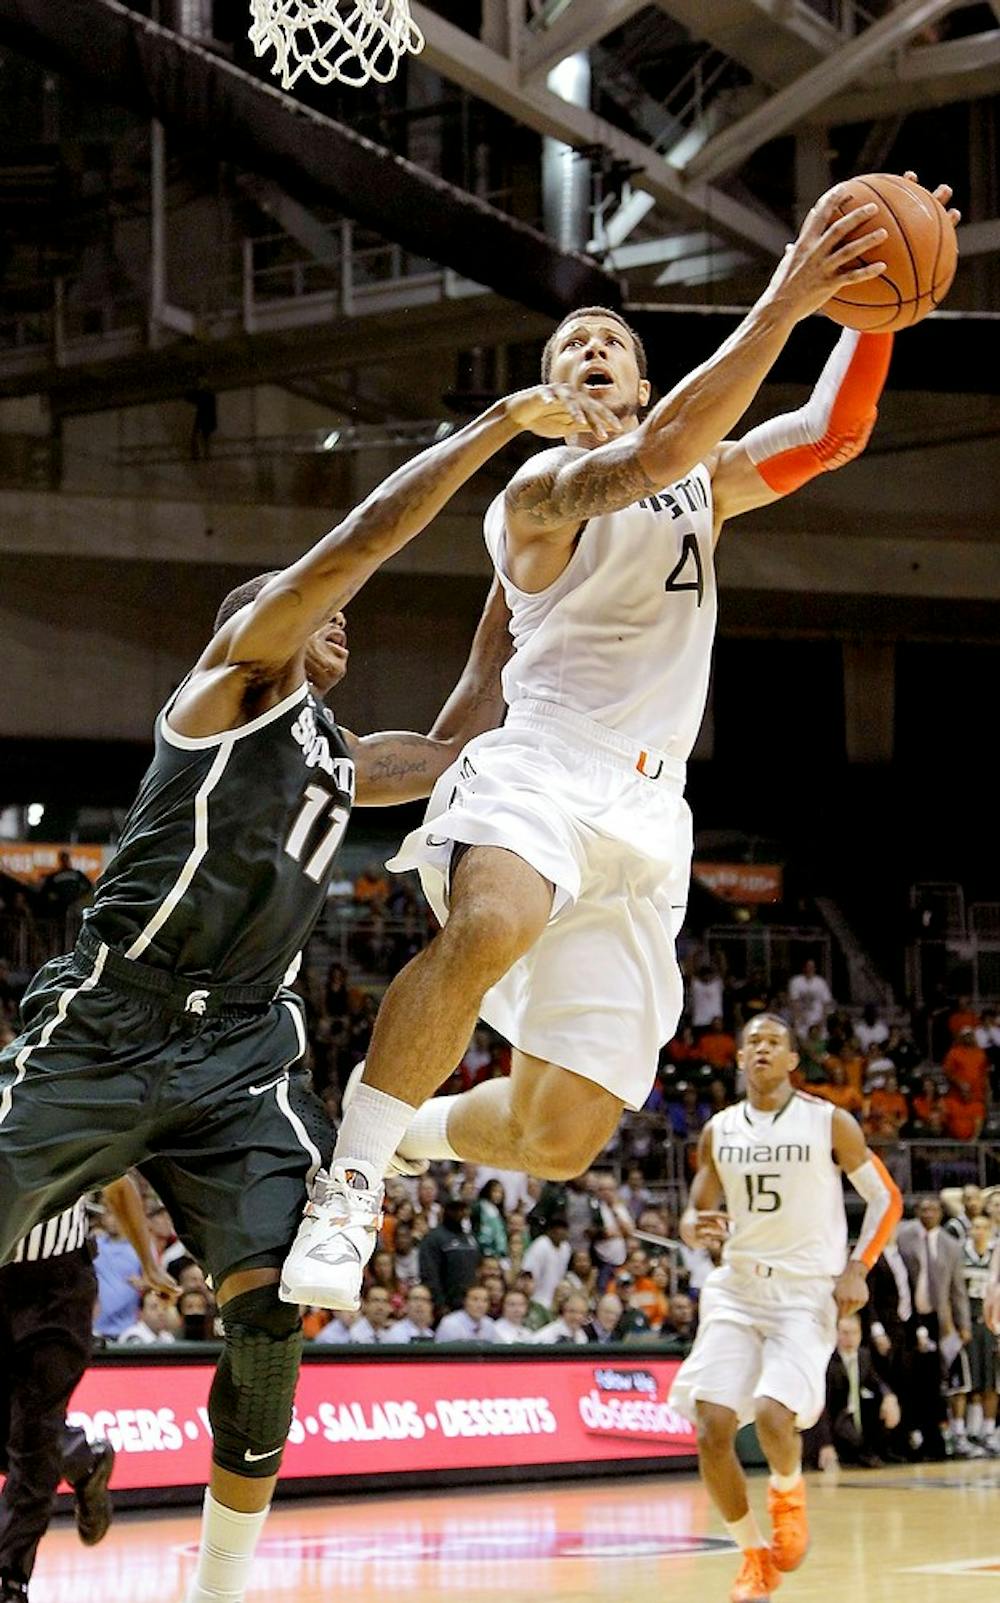 	<p>Miami&#8217;s Julian Gamble, right, drives pass Michigan State&#8217;s Keith Appling in the second half at the BankUnited Center on Wednesday, November 28, 2012, in Coral Gables, Florida. The Miami Hurricanes defeated the Michigan State Spartans, 67-59. Carl Juste/Miami Herald/MCT</p>